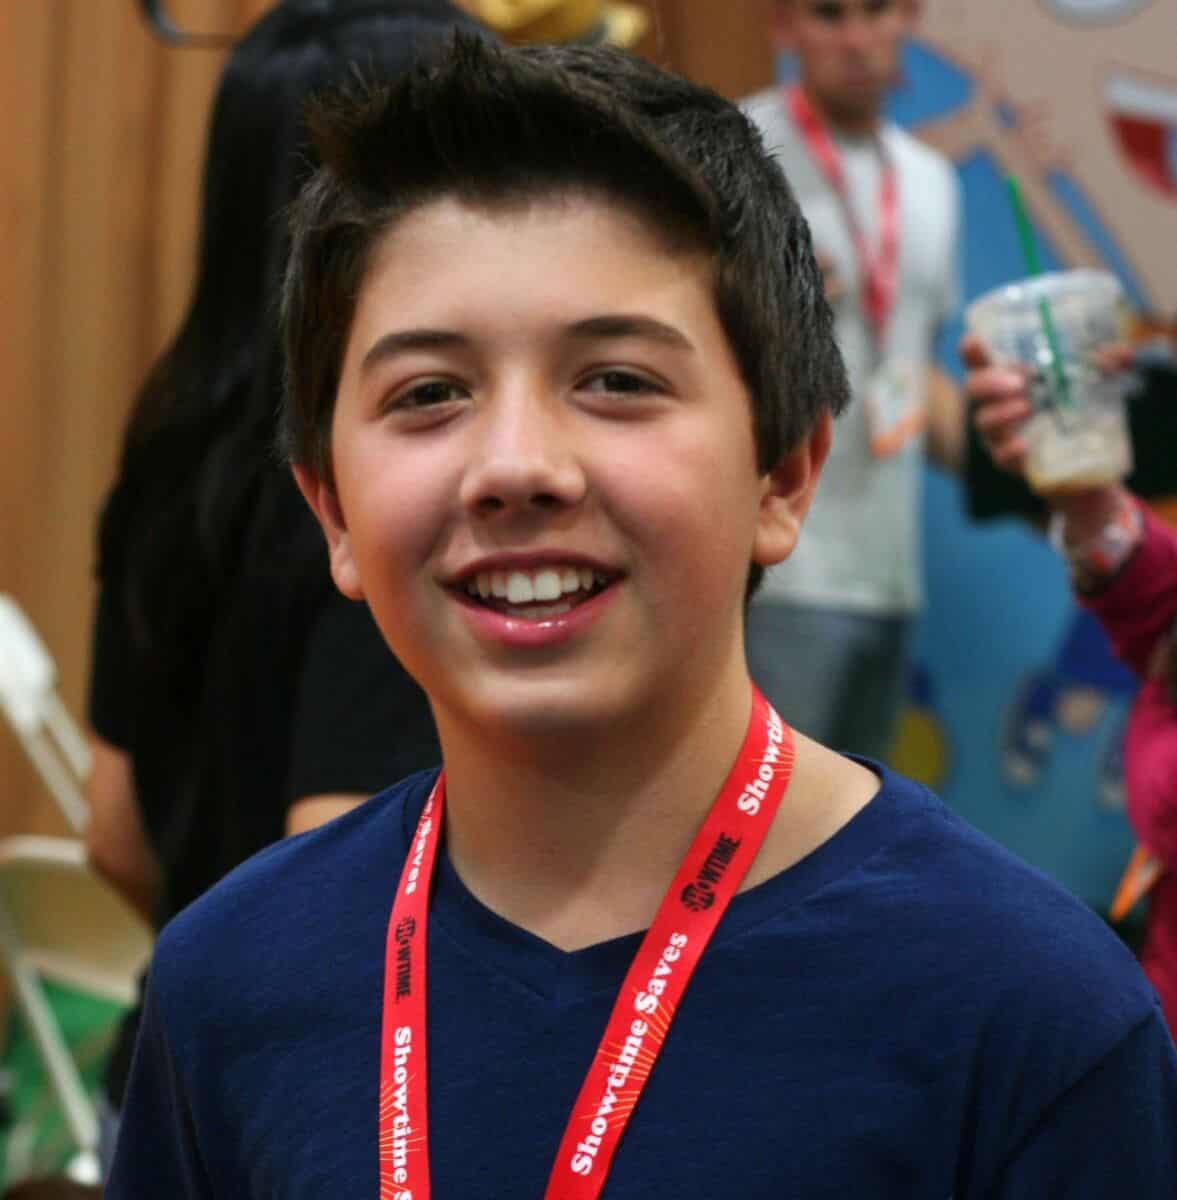 Bradley Steven Perry - Famous Child Actor